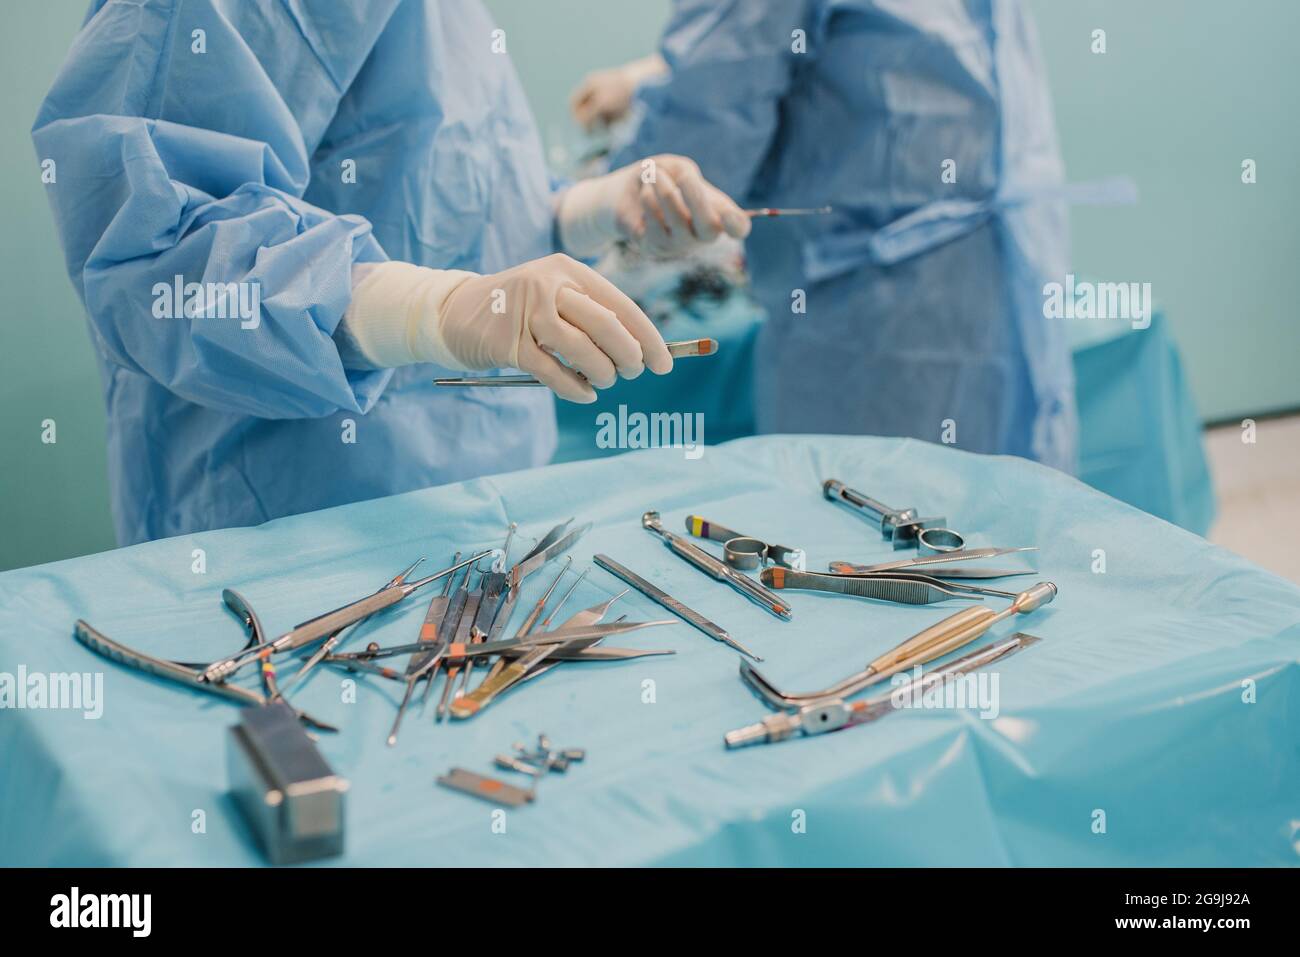 Medical team preparing surgical equipment for operation inside emergency hospital clinic - Focus on left doctor hand Stock Photo